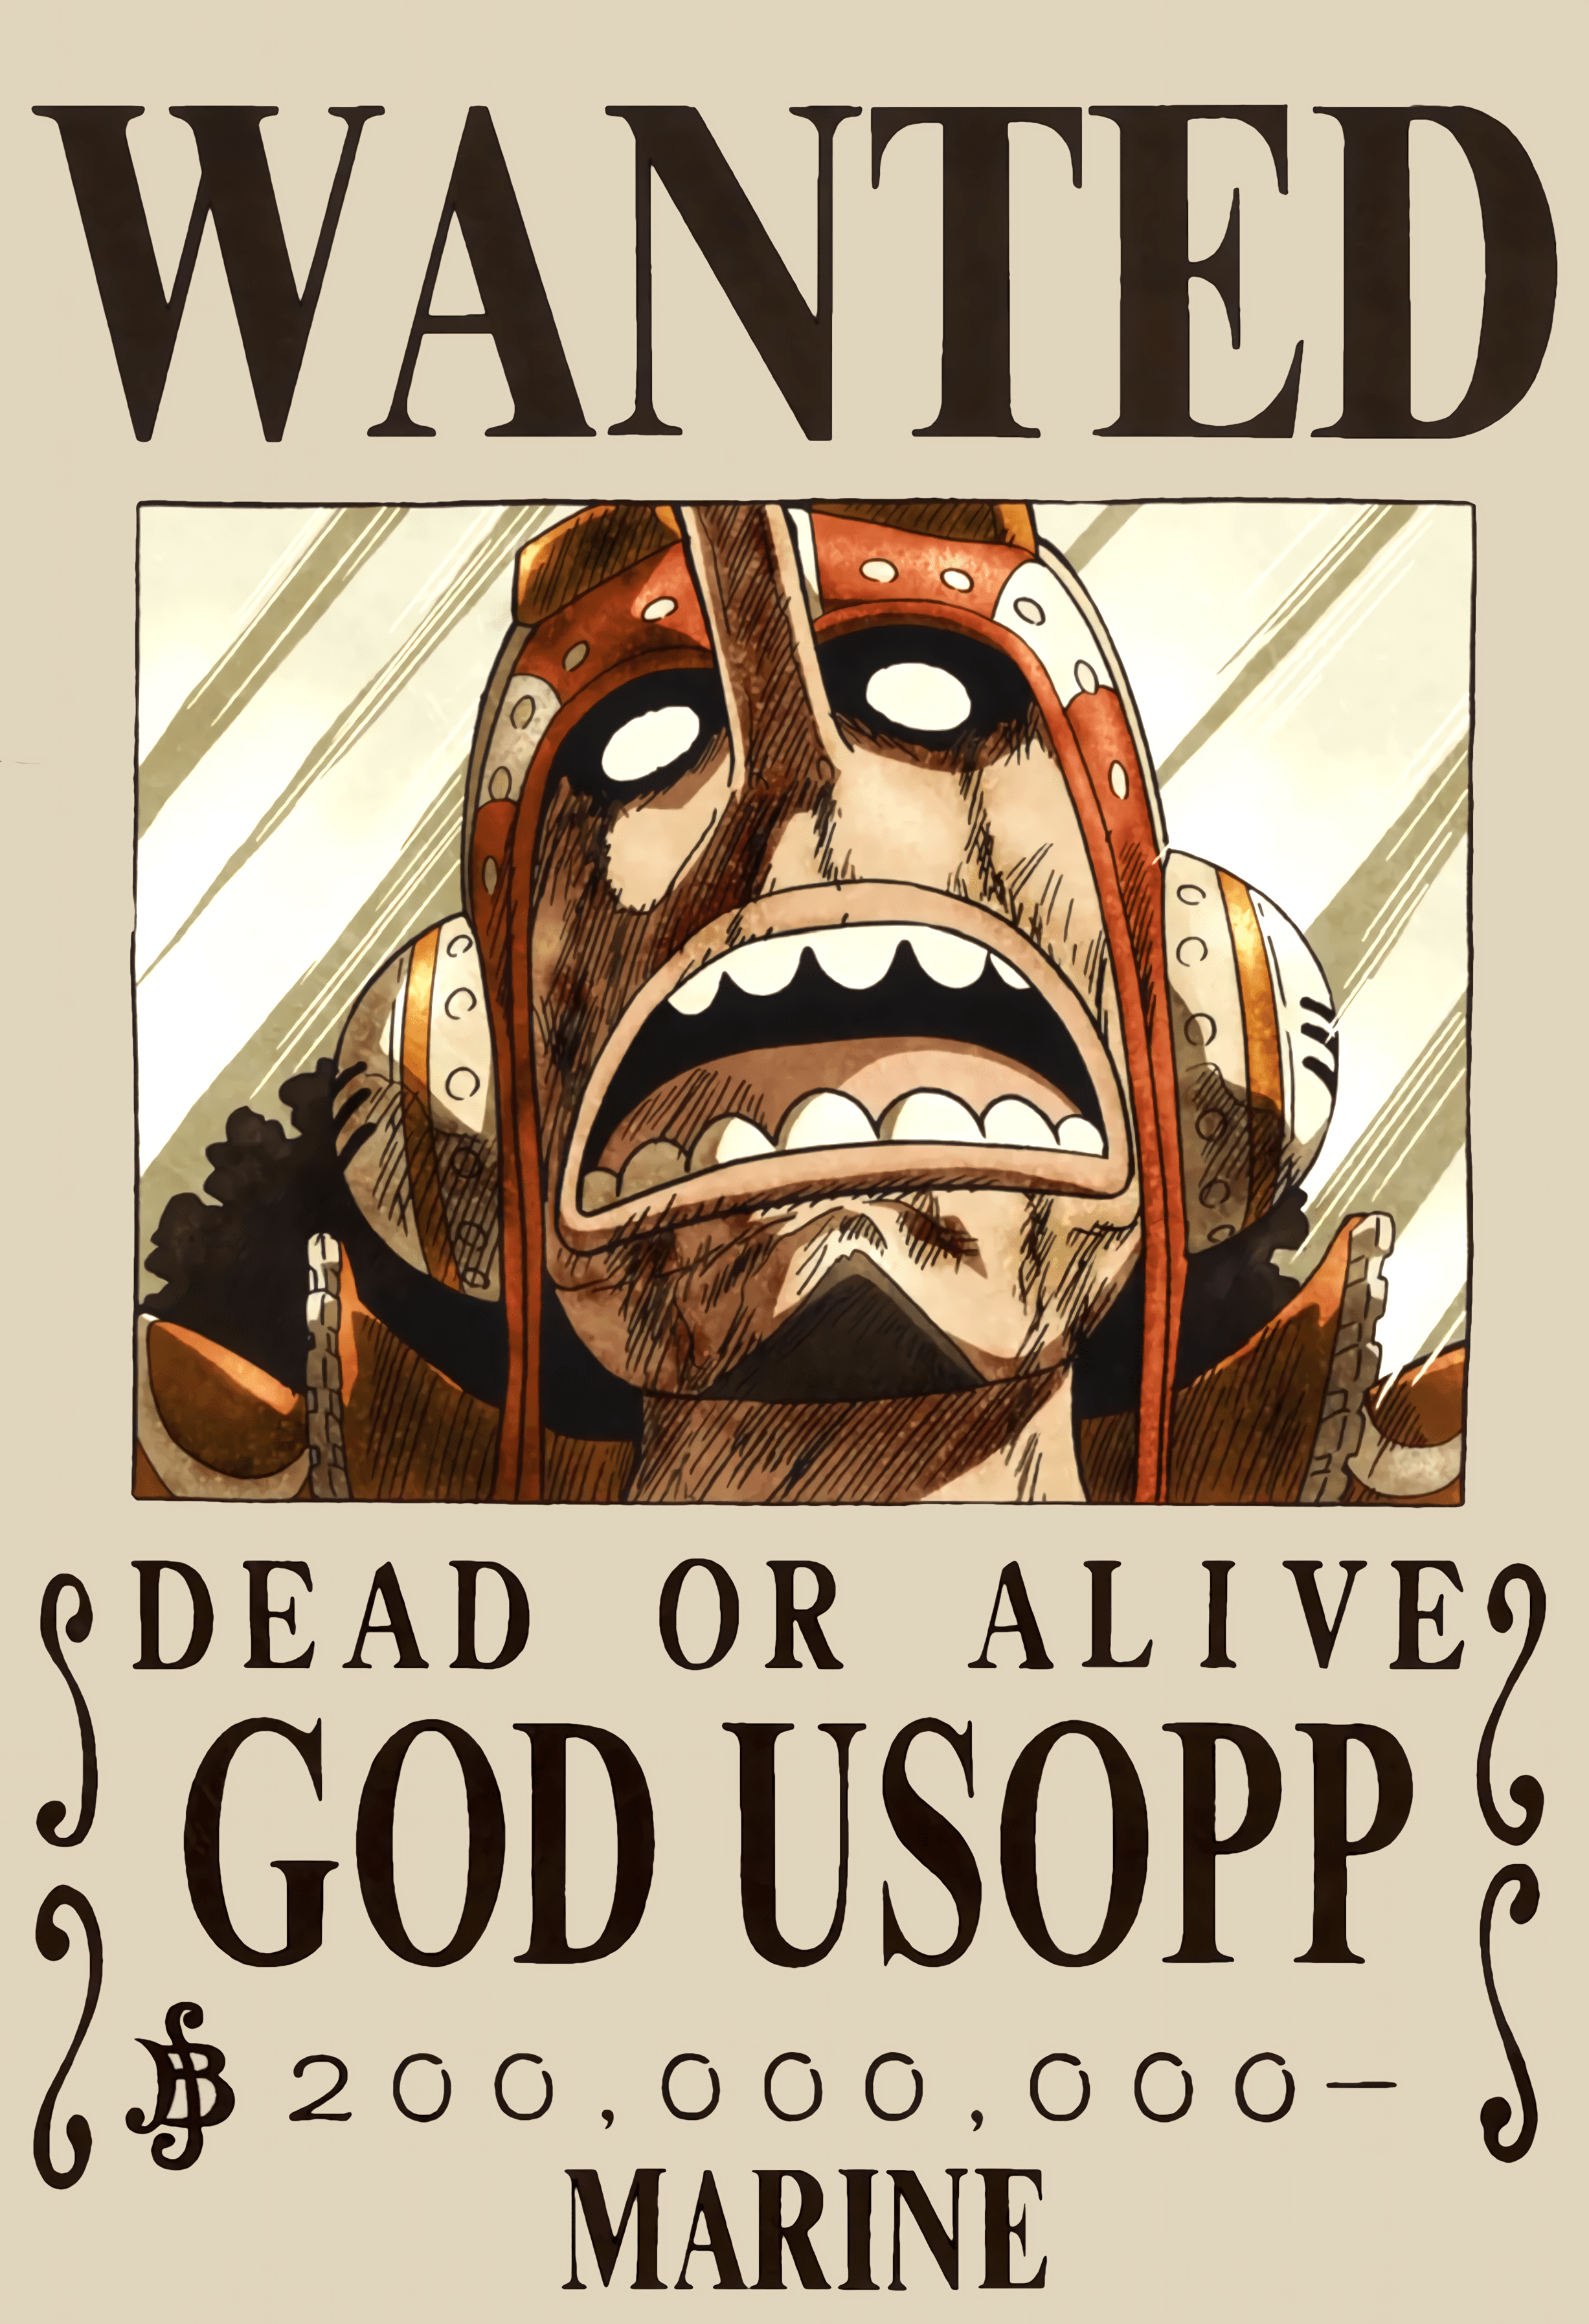 One Piece Usopp 2 Years Later Wallpaper For Iphone Transparent PNG   773x1034  Free Download on NicePNG